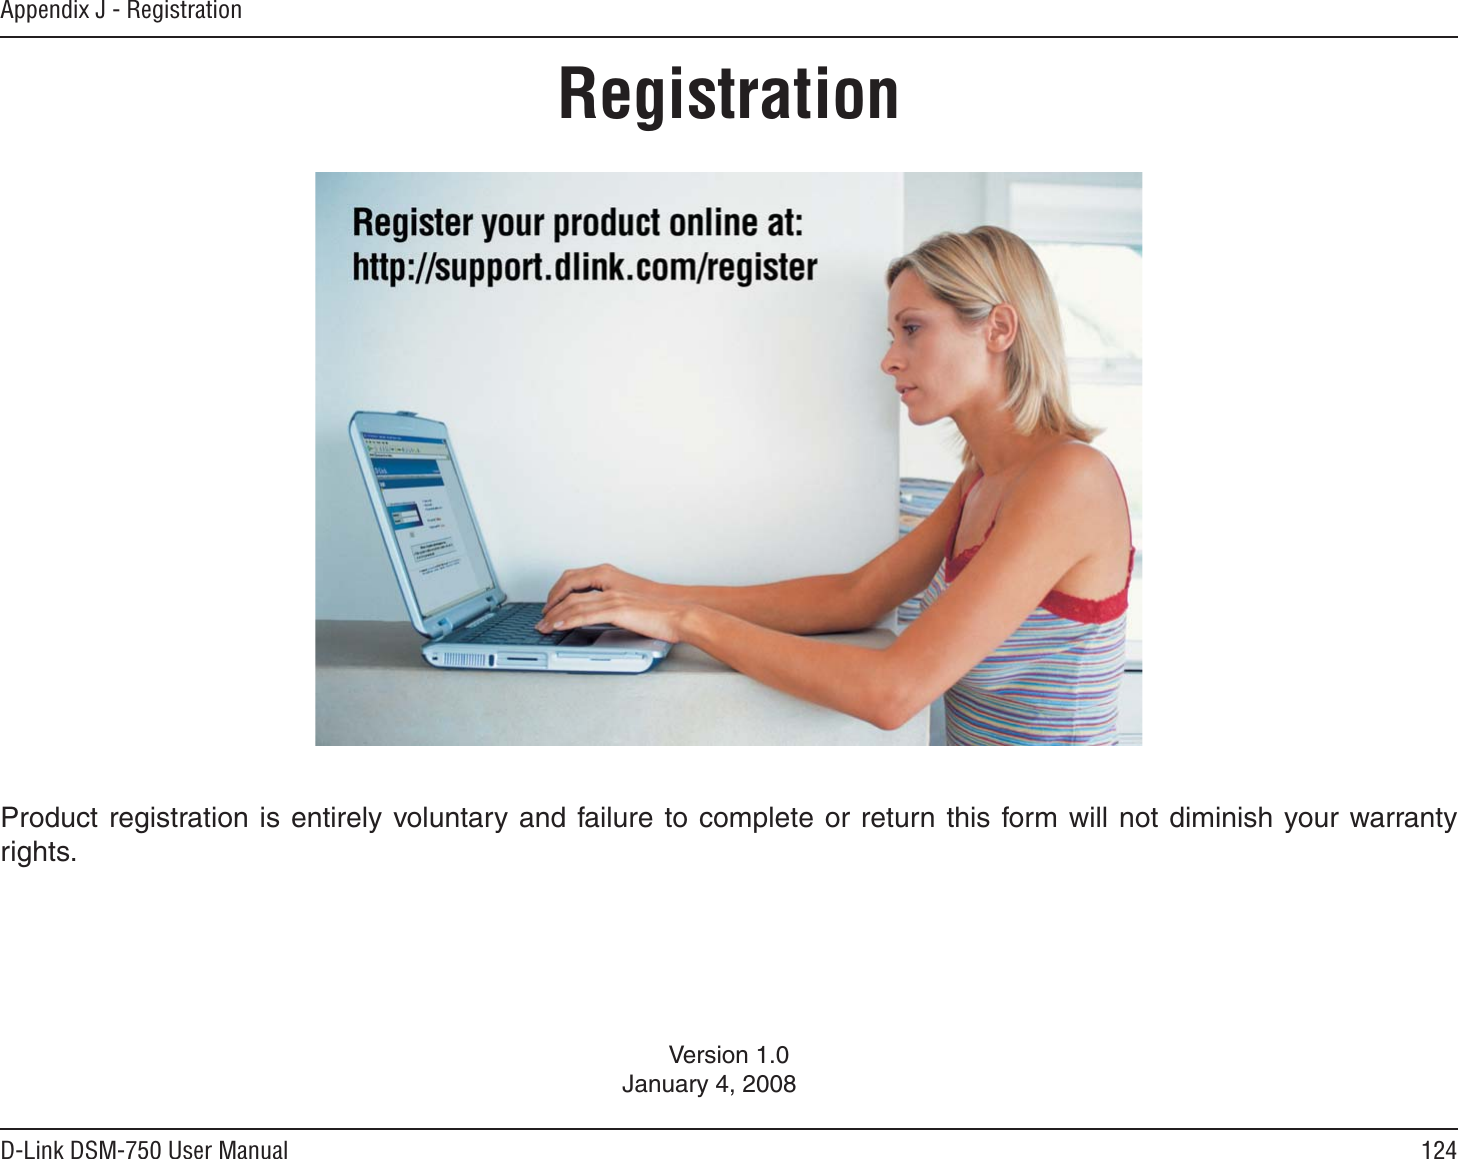 124D-Link DSM-750 User ManualAppendix J - RegistrationVersion 1.0January 4, 2008Product registration is entirely voluntary and failure to complete or return this form will not diminish your warranty rights.Registration